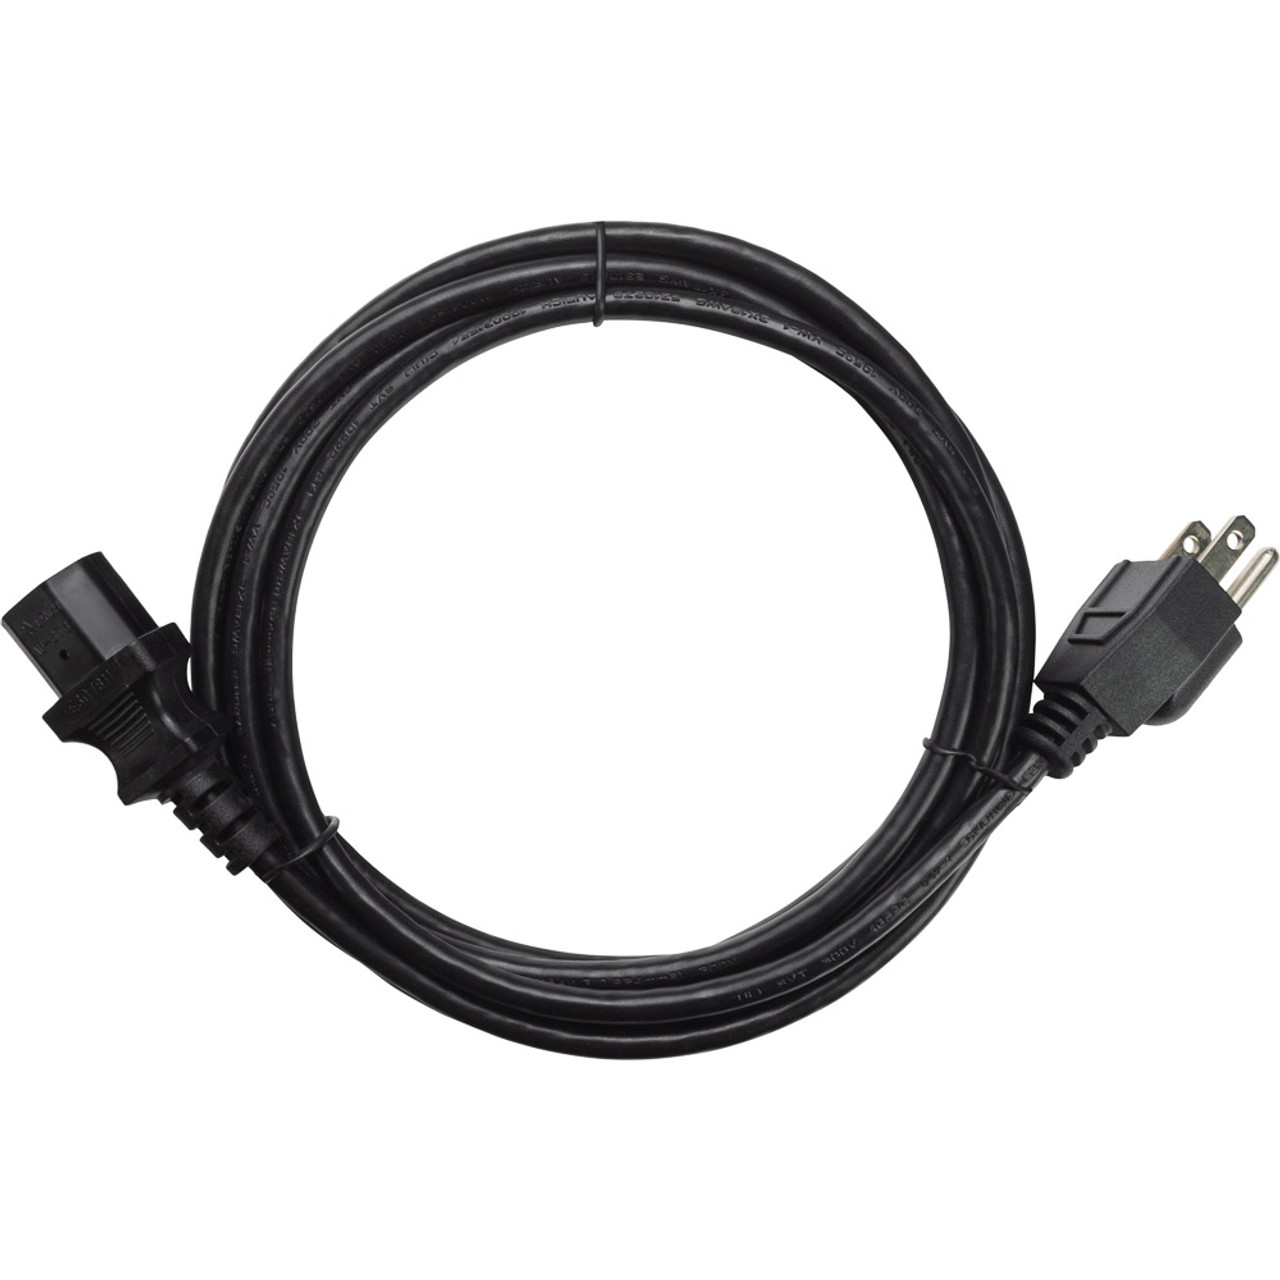 NavePoint 3-Prong AC Power Cord 10 Ft Black